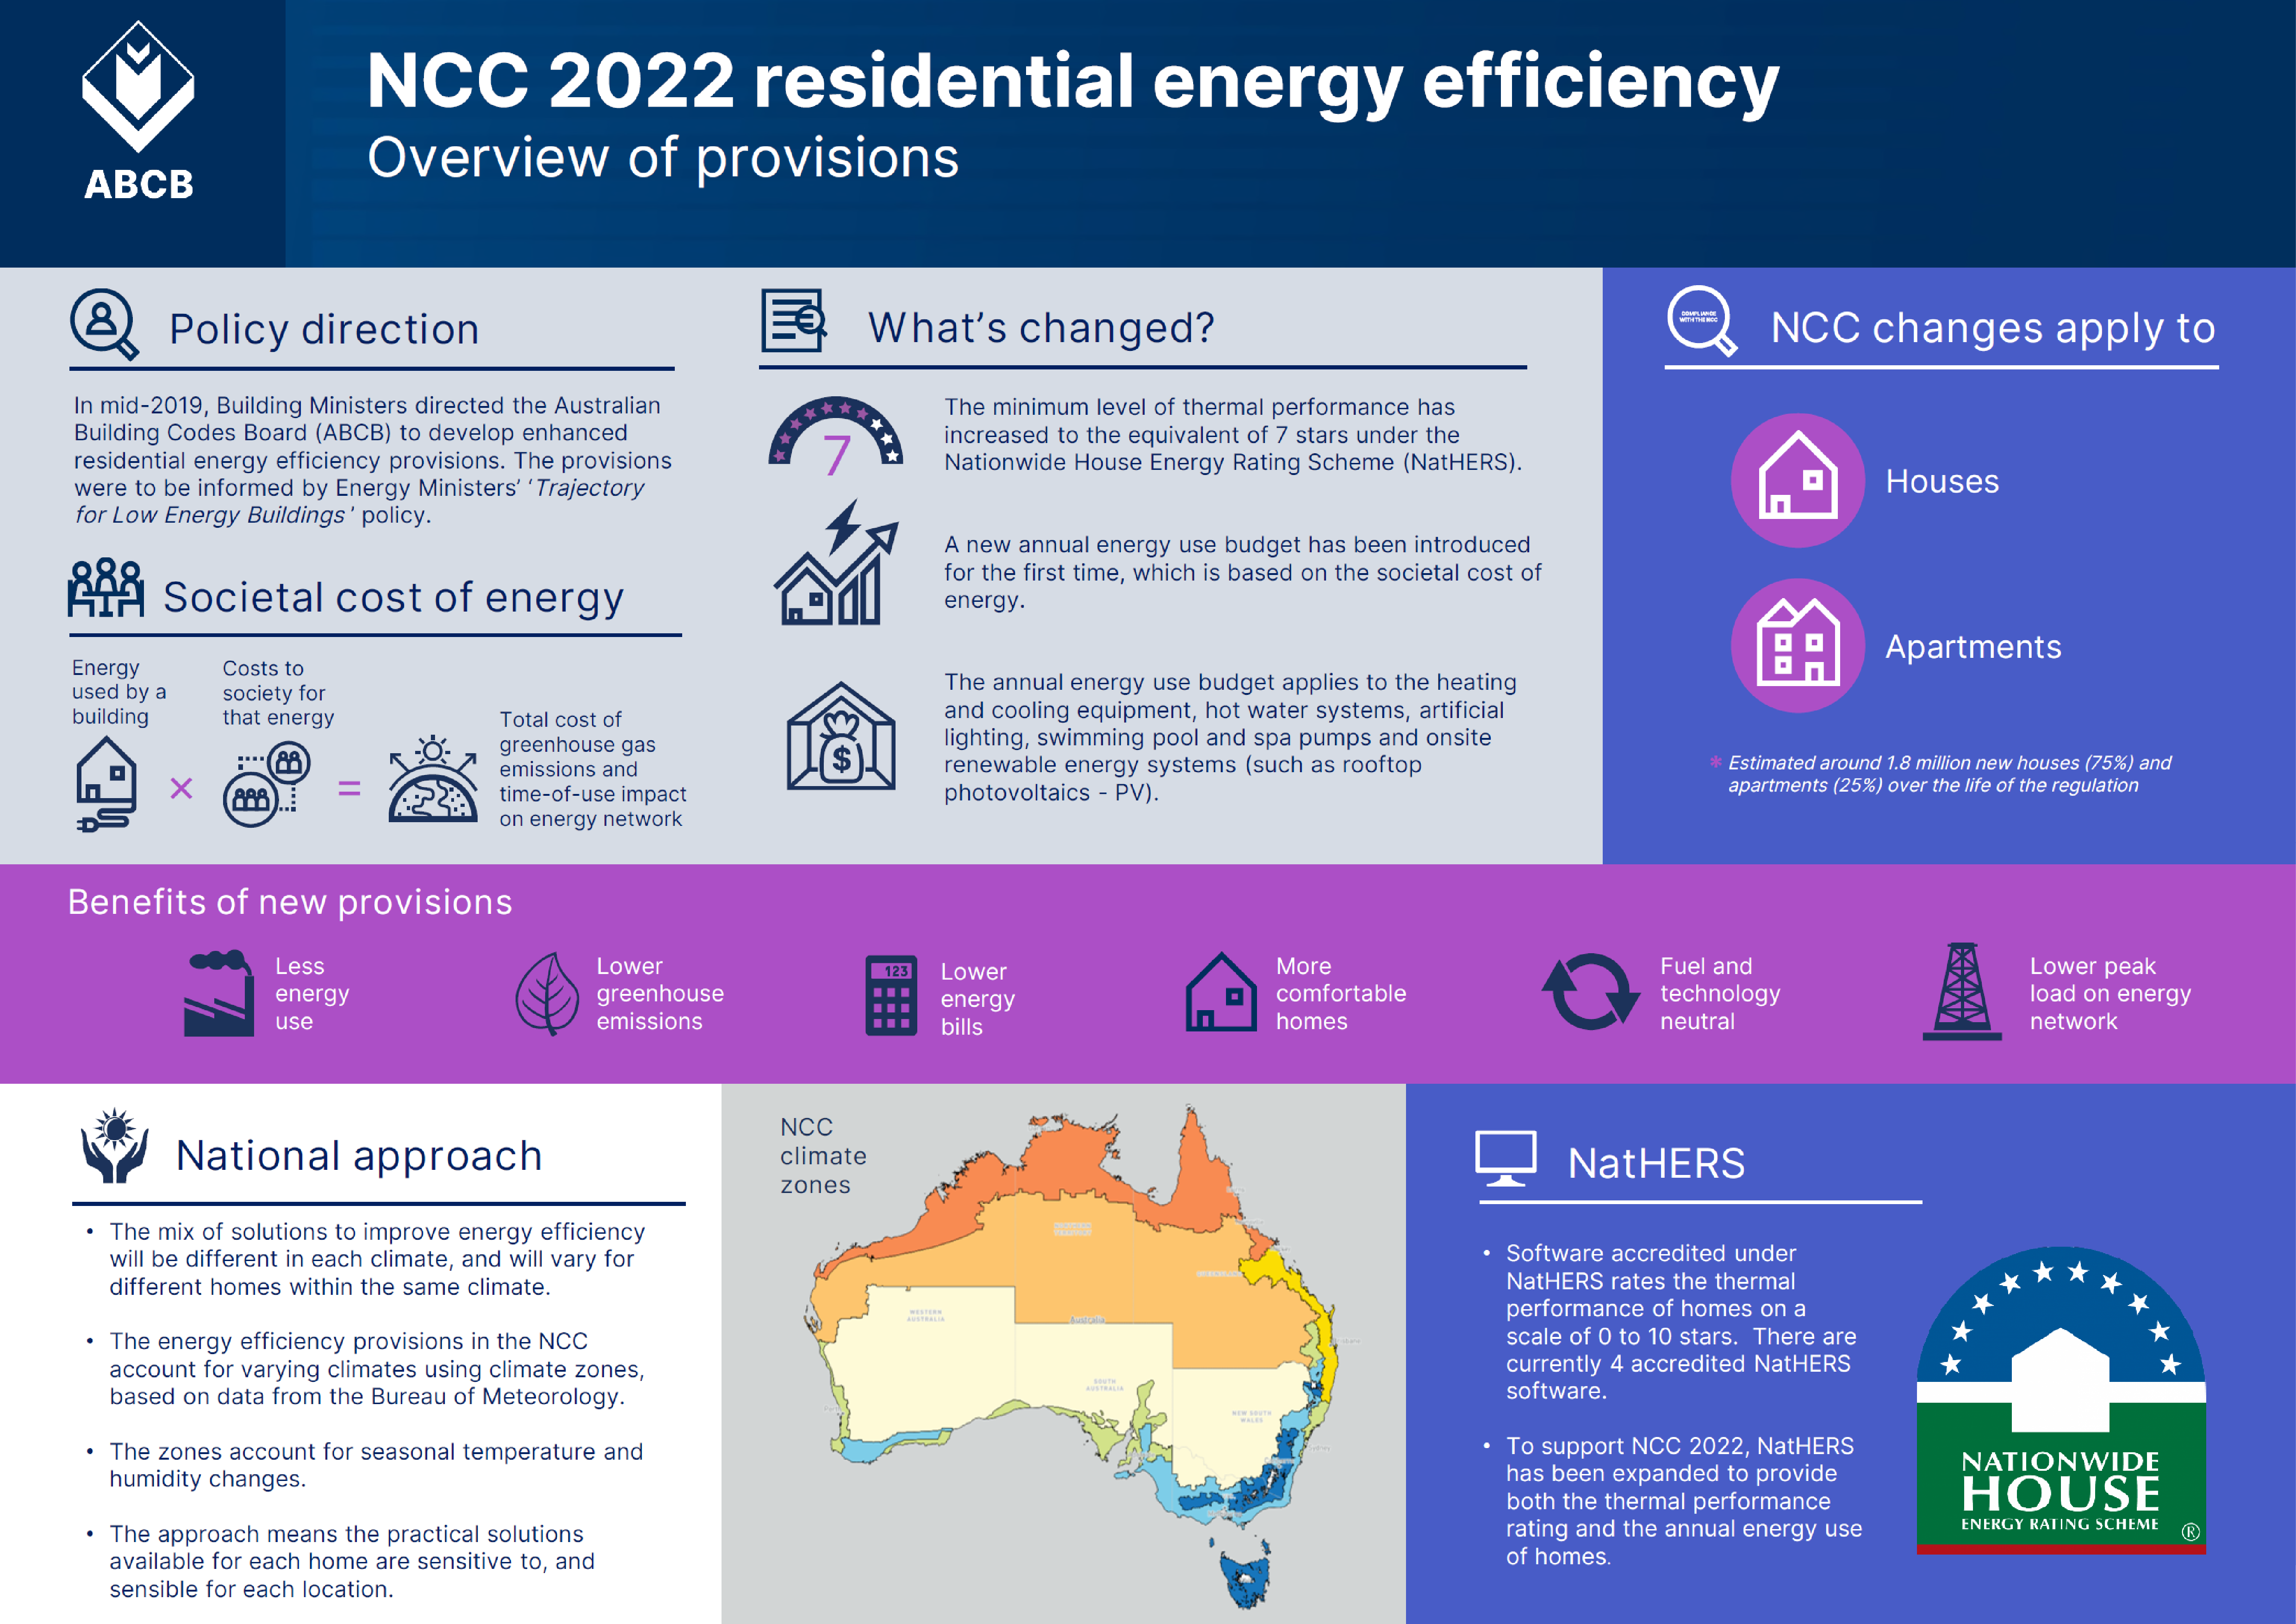 NCC 2022 Residential Energy Efficiency Overview2